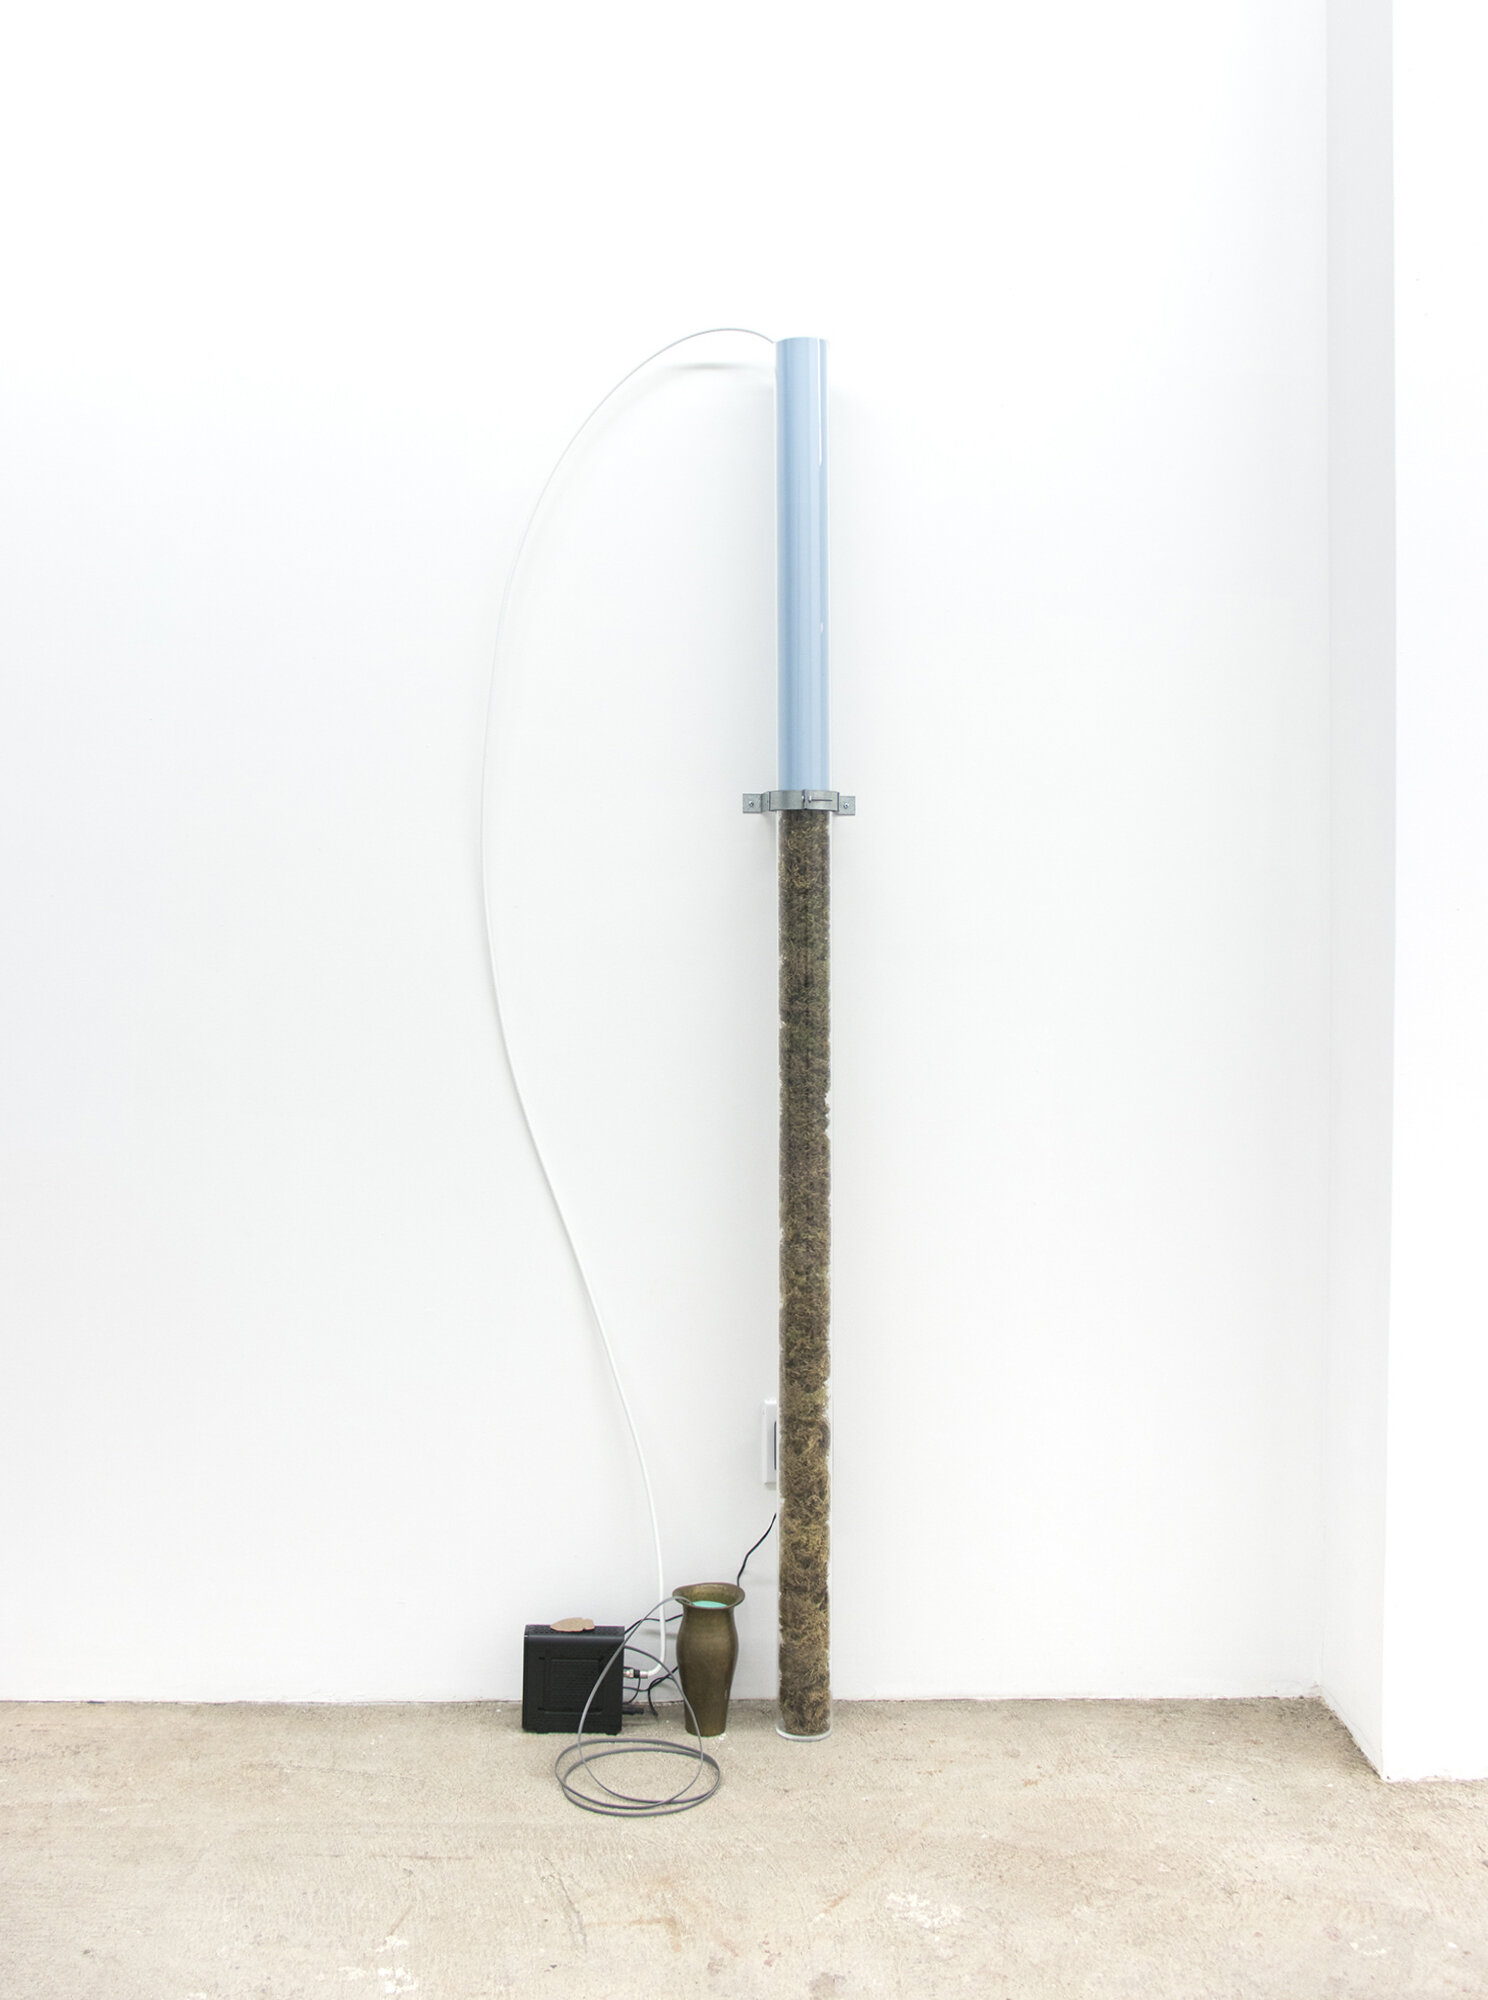  Connor McNicholas  Phase Transition , 2020 Plexiglass, unprocessed photographic paper, moss, bronze,&nbsp; modem, carved stone, silicone, cables, hardware 17 x 72 inches (43.18 x 182.88 cm) (CM12) 